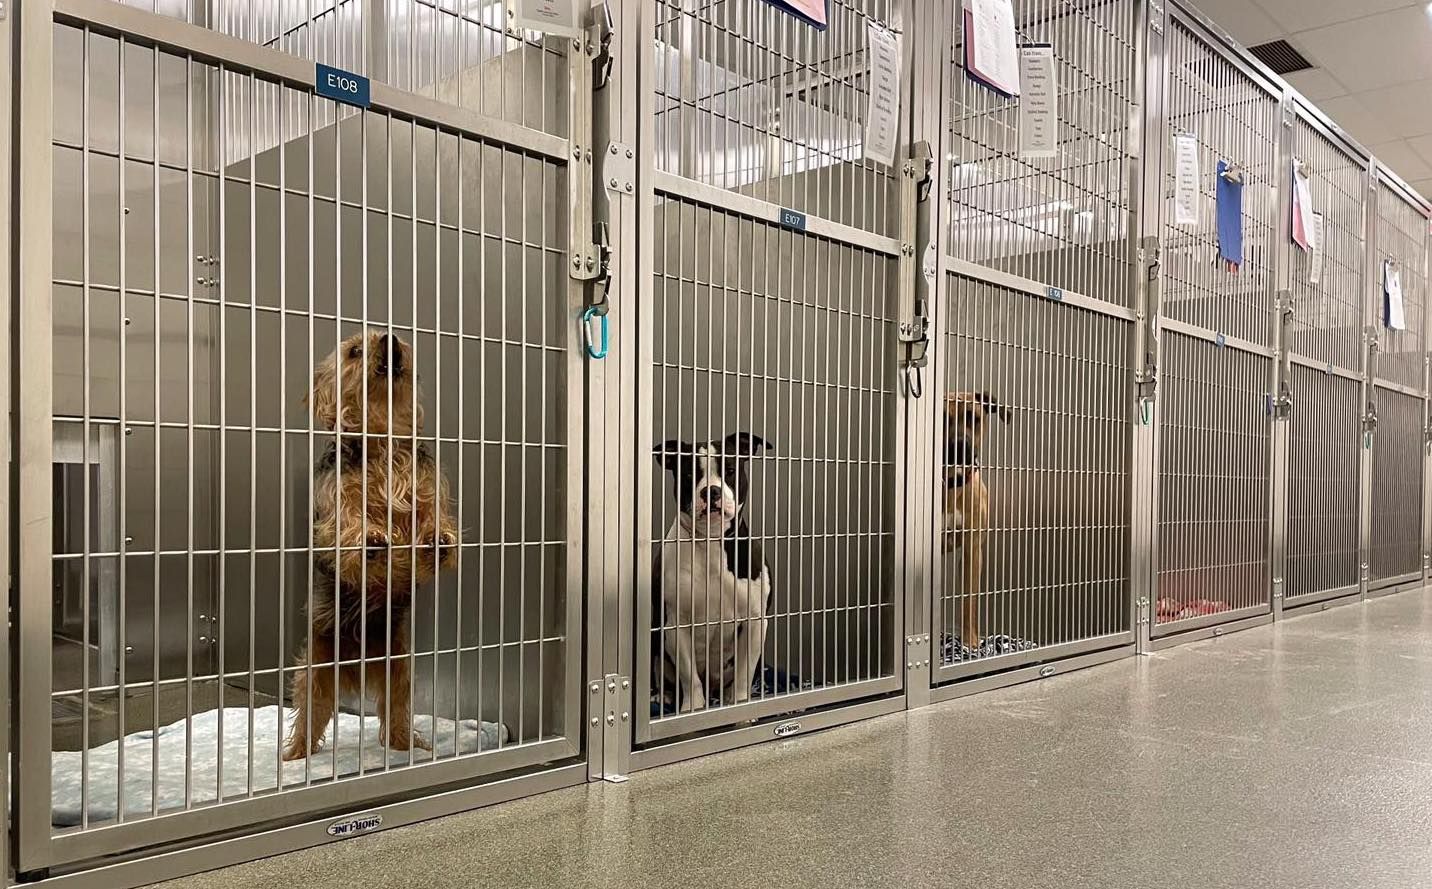 Adoptable dogs sit in cages at the Franklin County Dog Shelter & Adoption Center